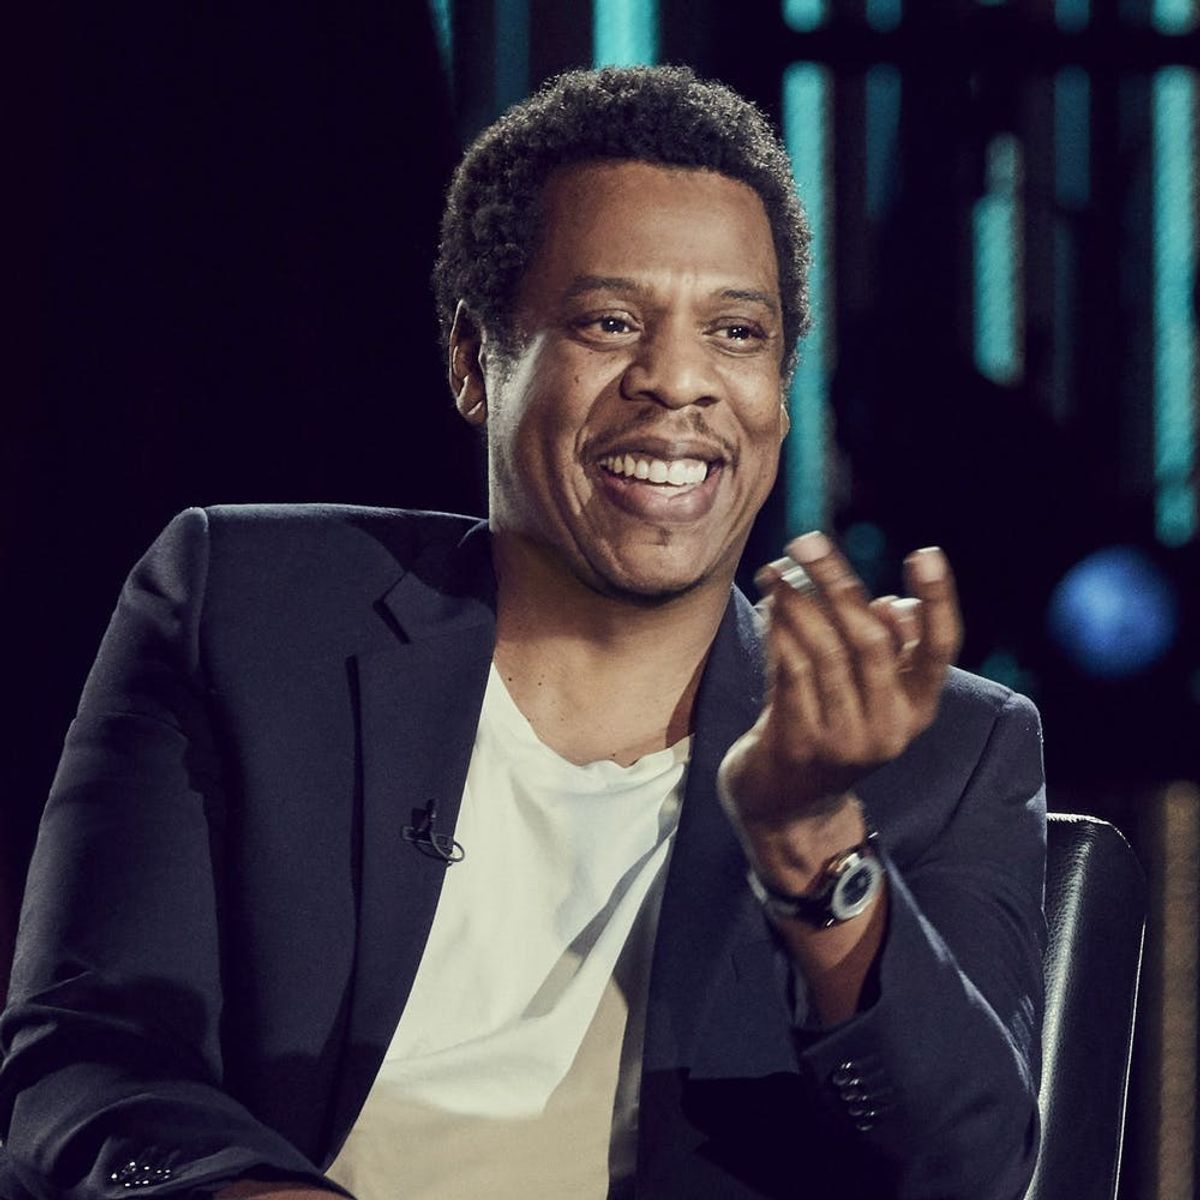 Jay-Z Cried Tears of Happiness When His Mom Came Out to Him